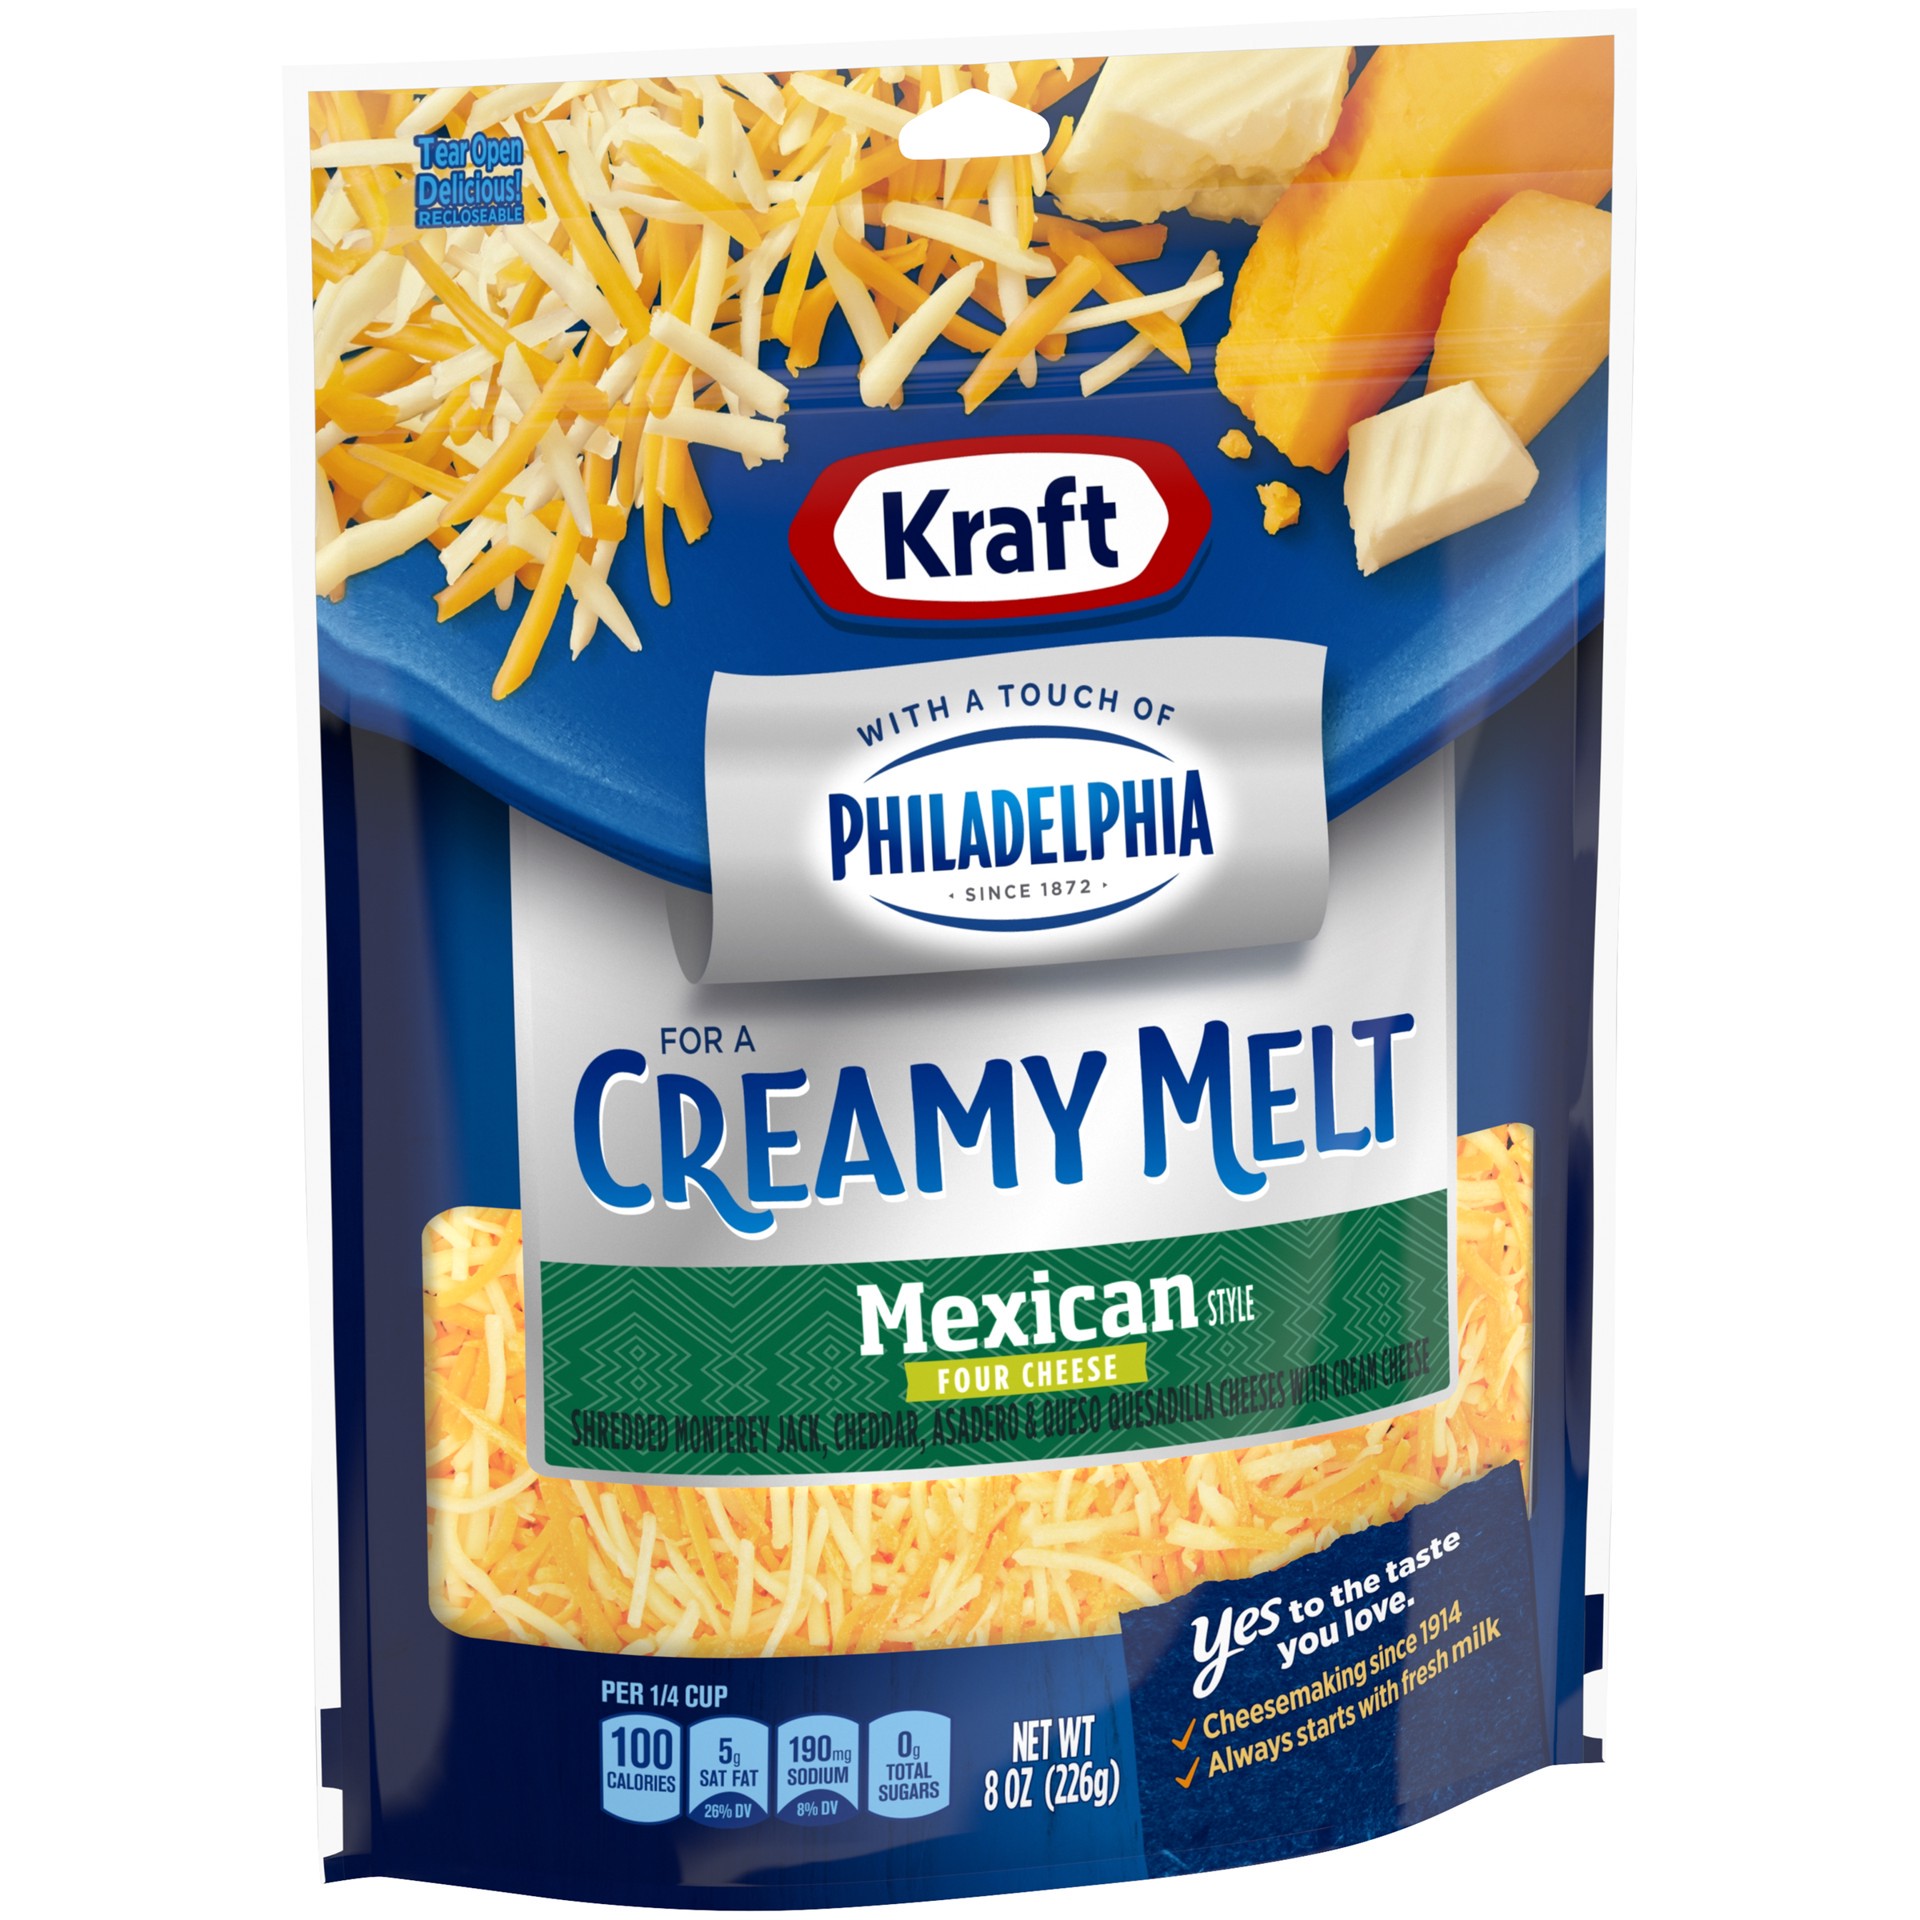 slide 3 of 6, Kraft Mexican Style Four Cheese Blend Shredded Cheese with a Touch of Philadelphia for a Creamy Melt, 8 oz